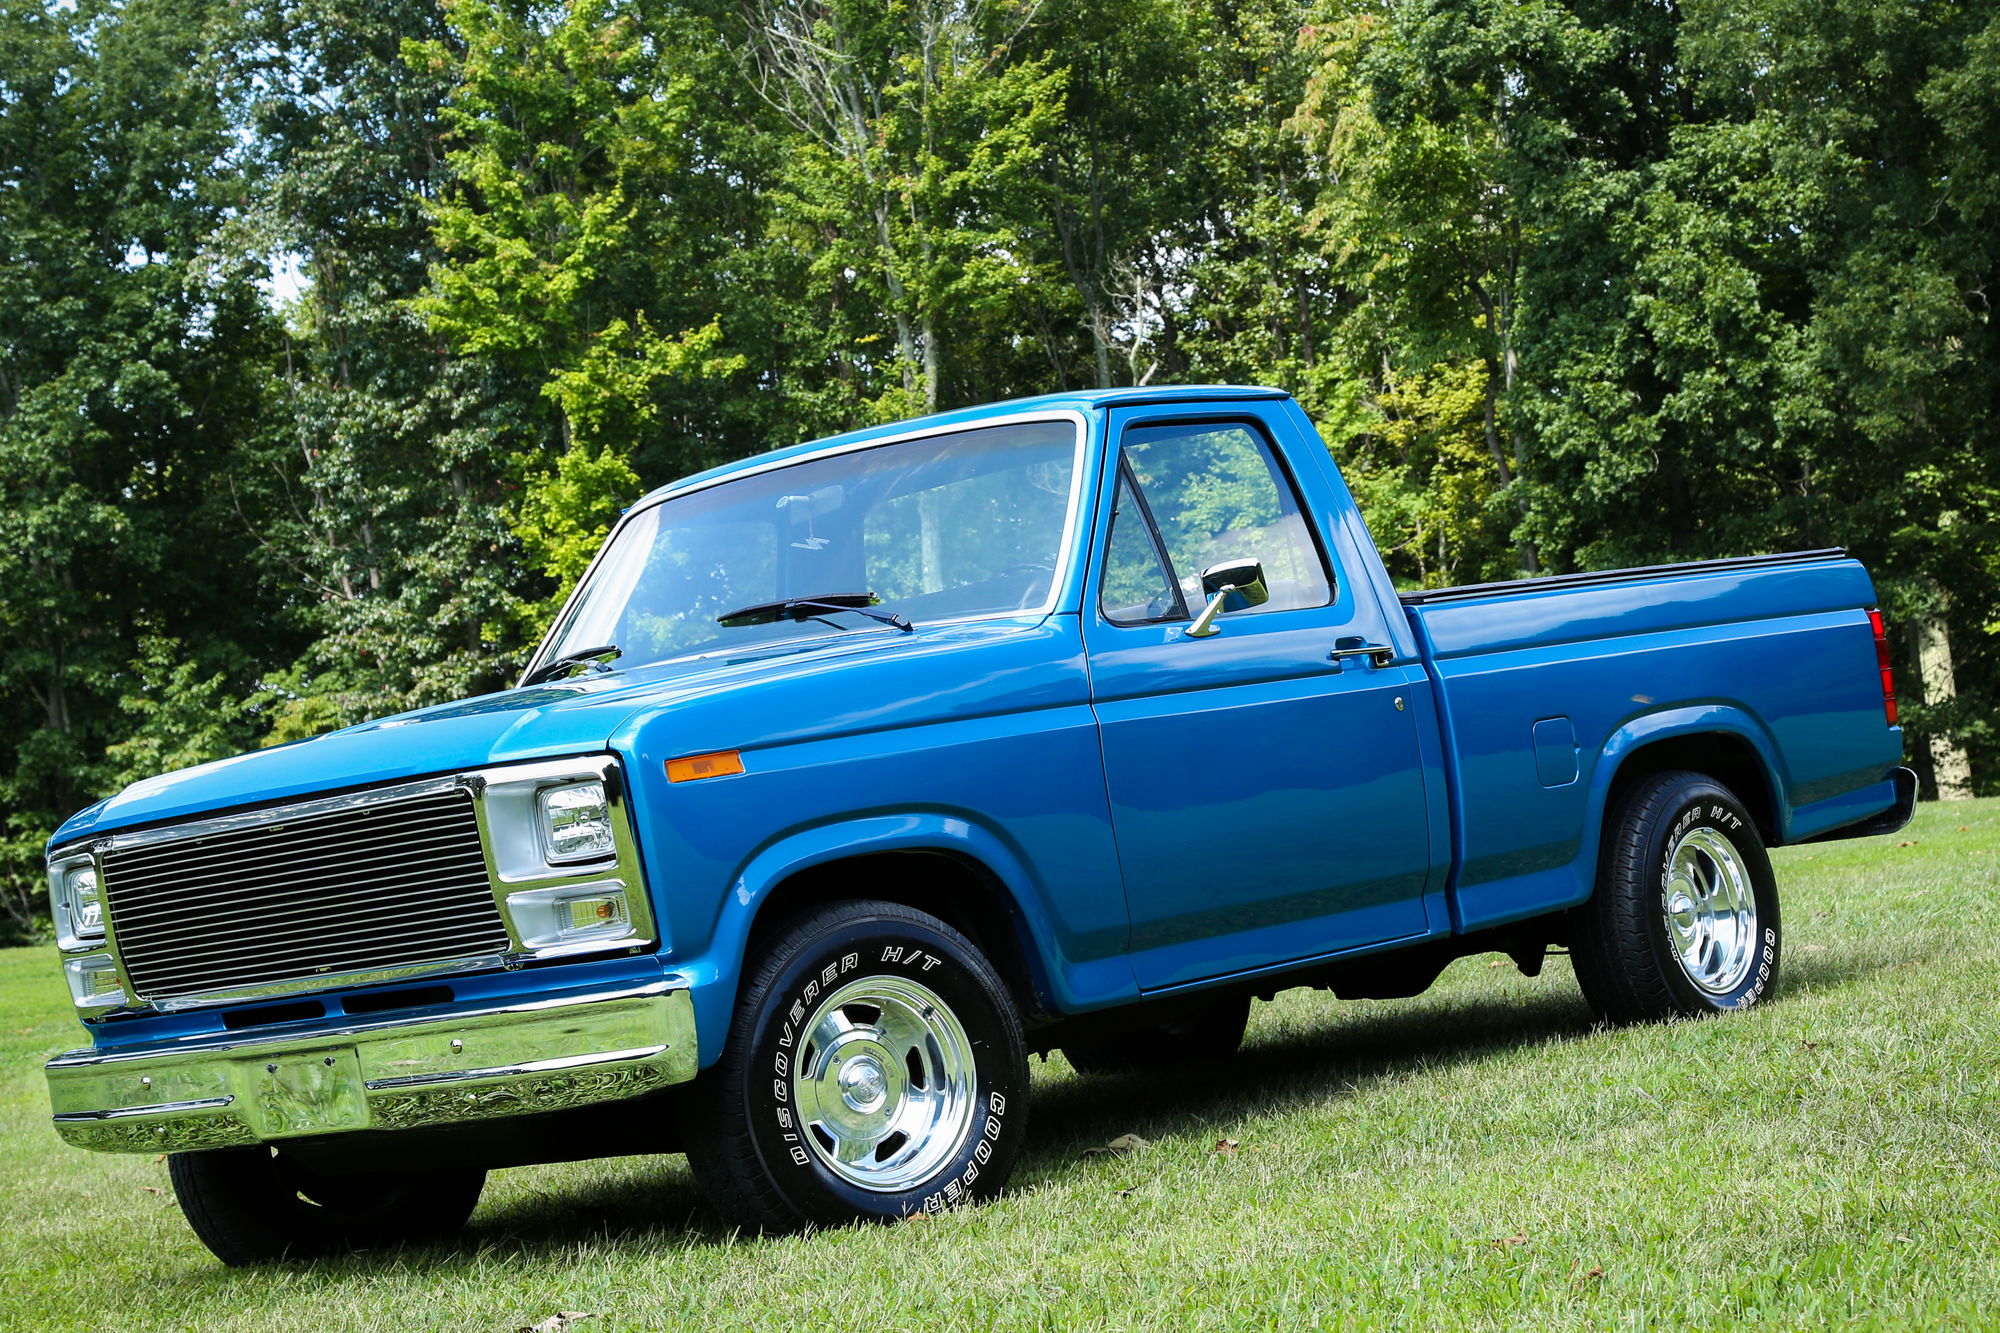 Форд пикап бу. Ford f150 old. Ford f150 80. 1980 Ford f-150 Pickup. Ford 150 Truck.